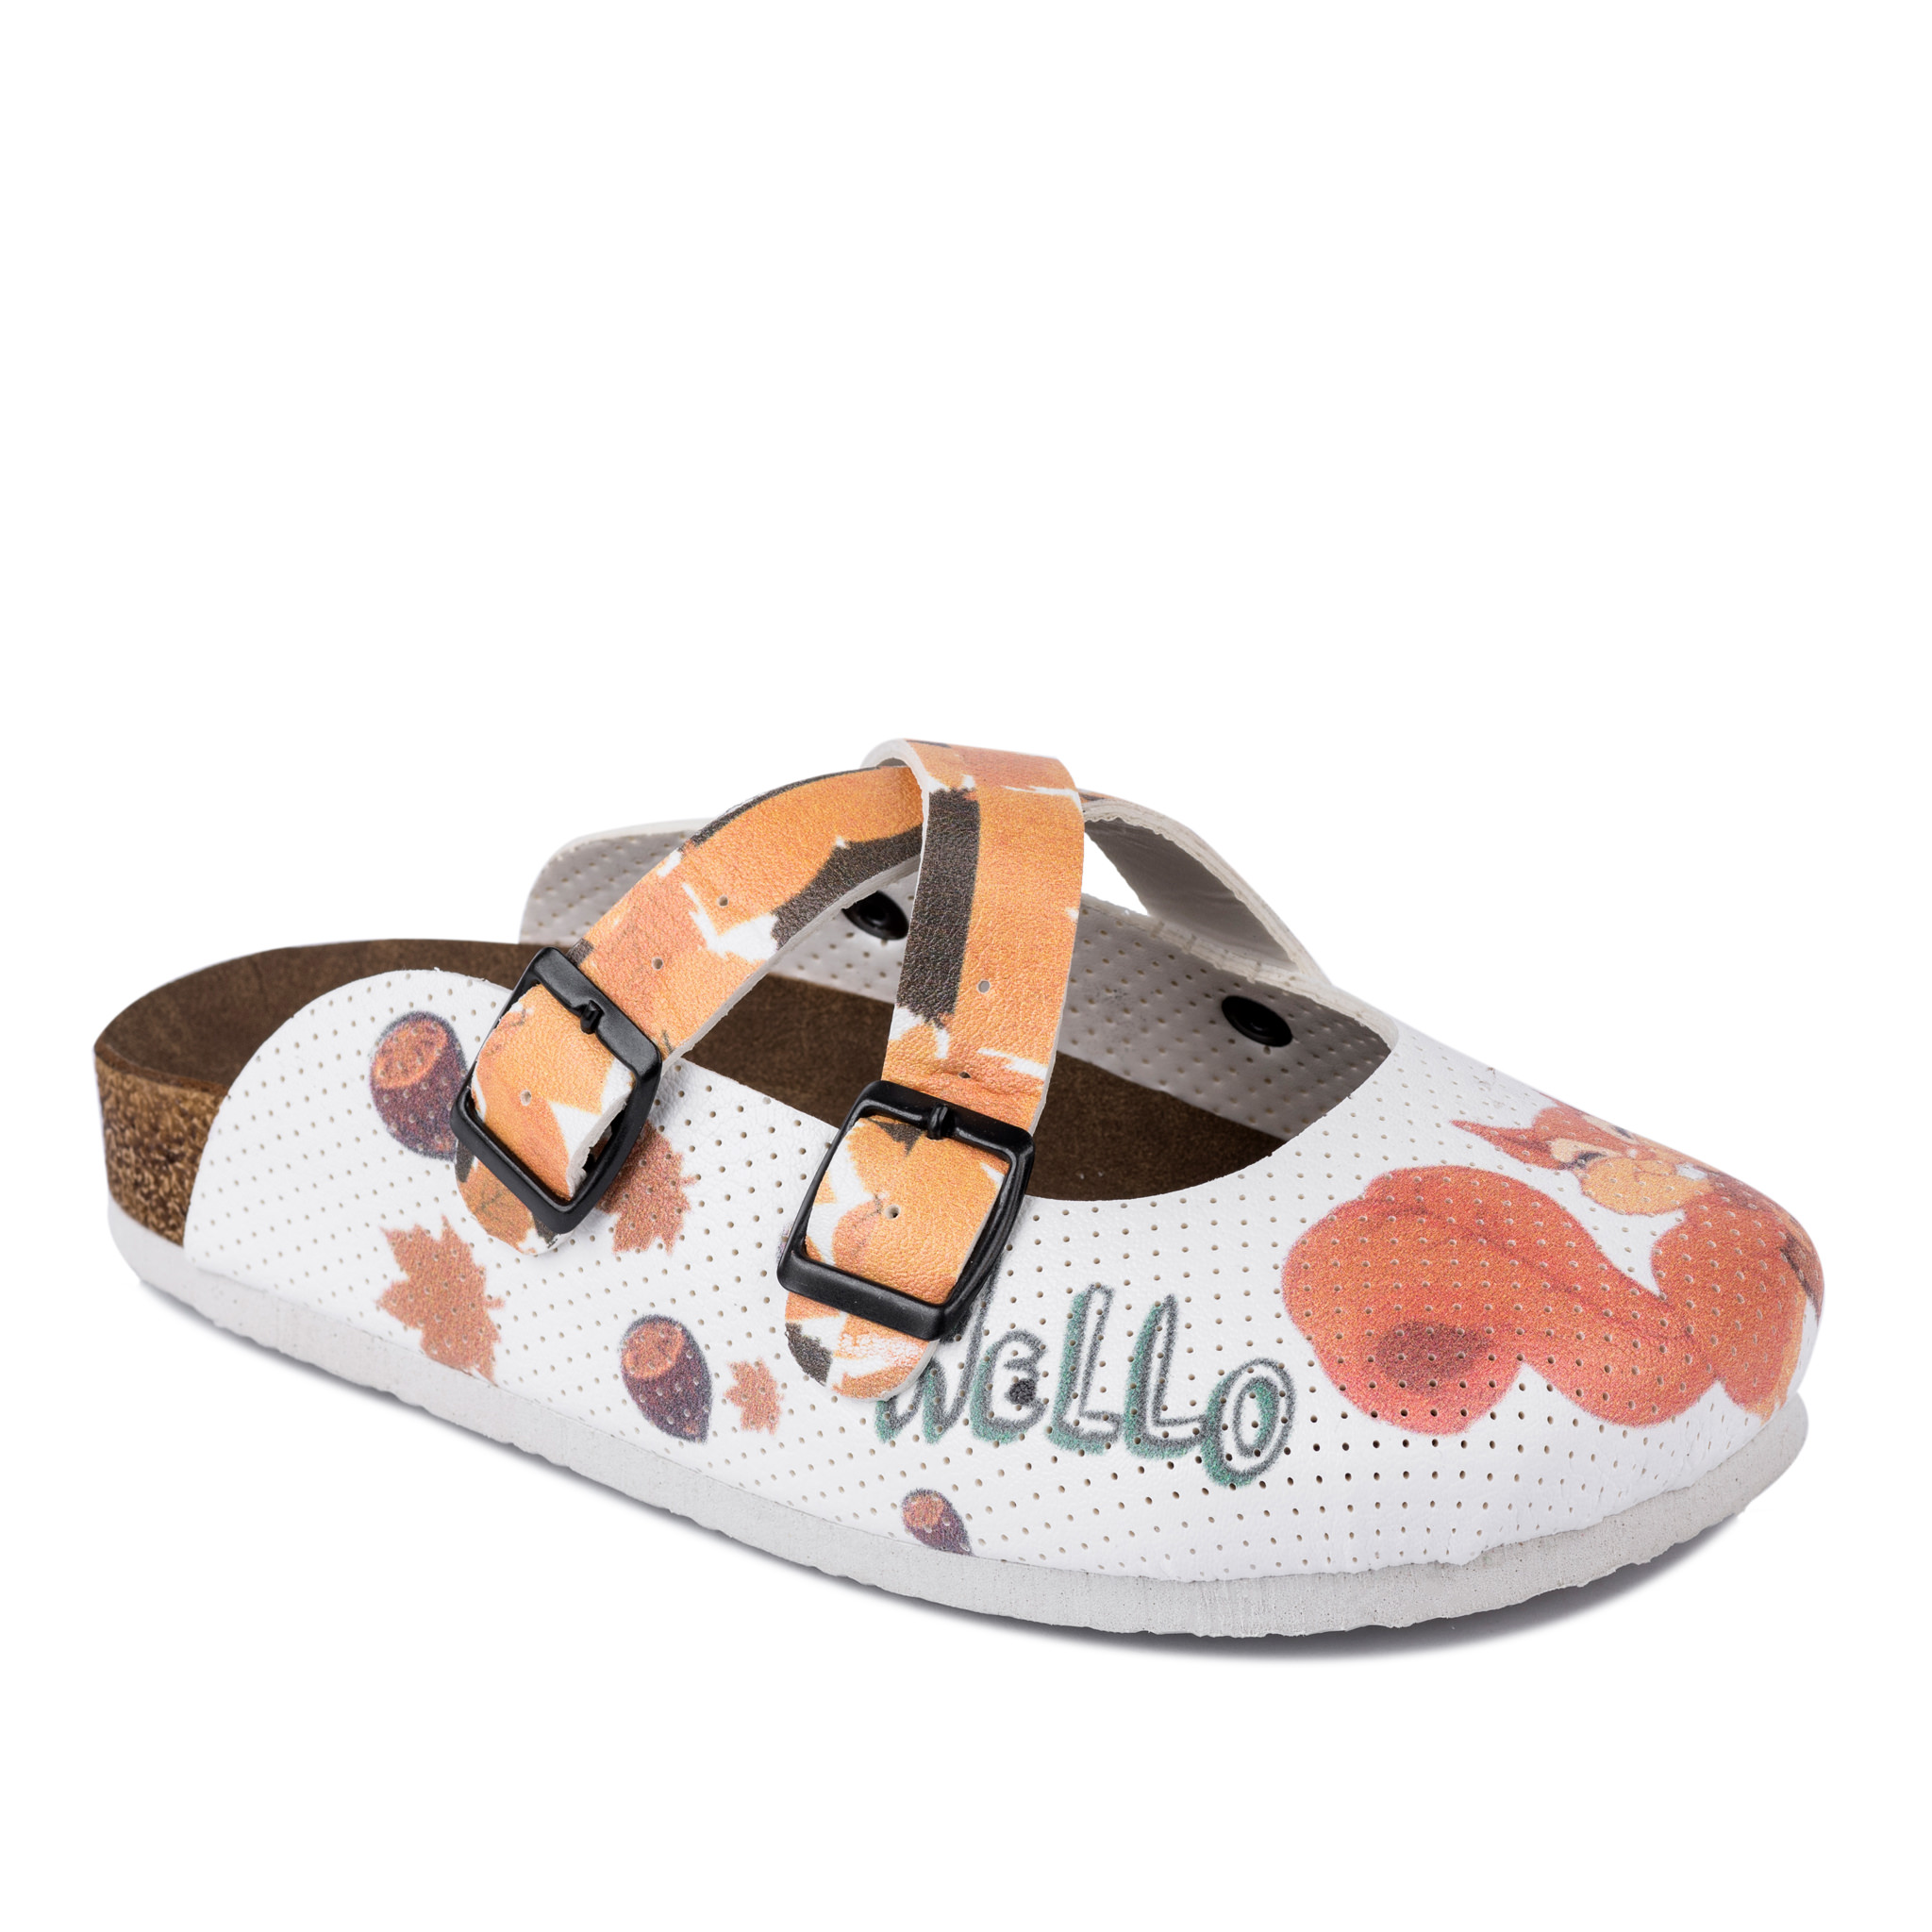 Patterned women clogs A144 - SQUIRREL - WHITE